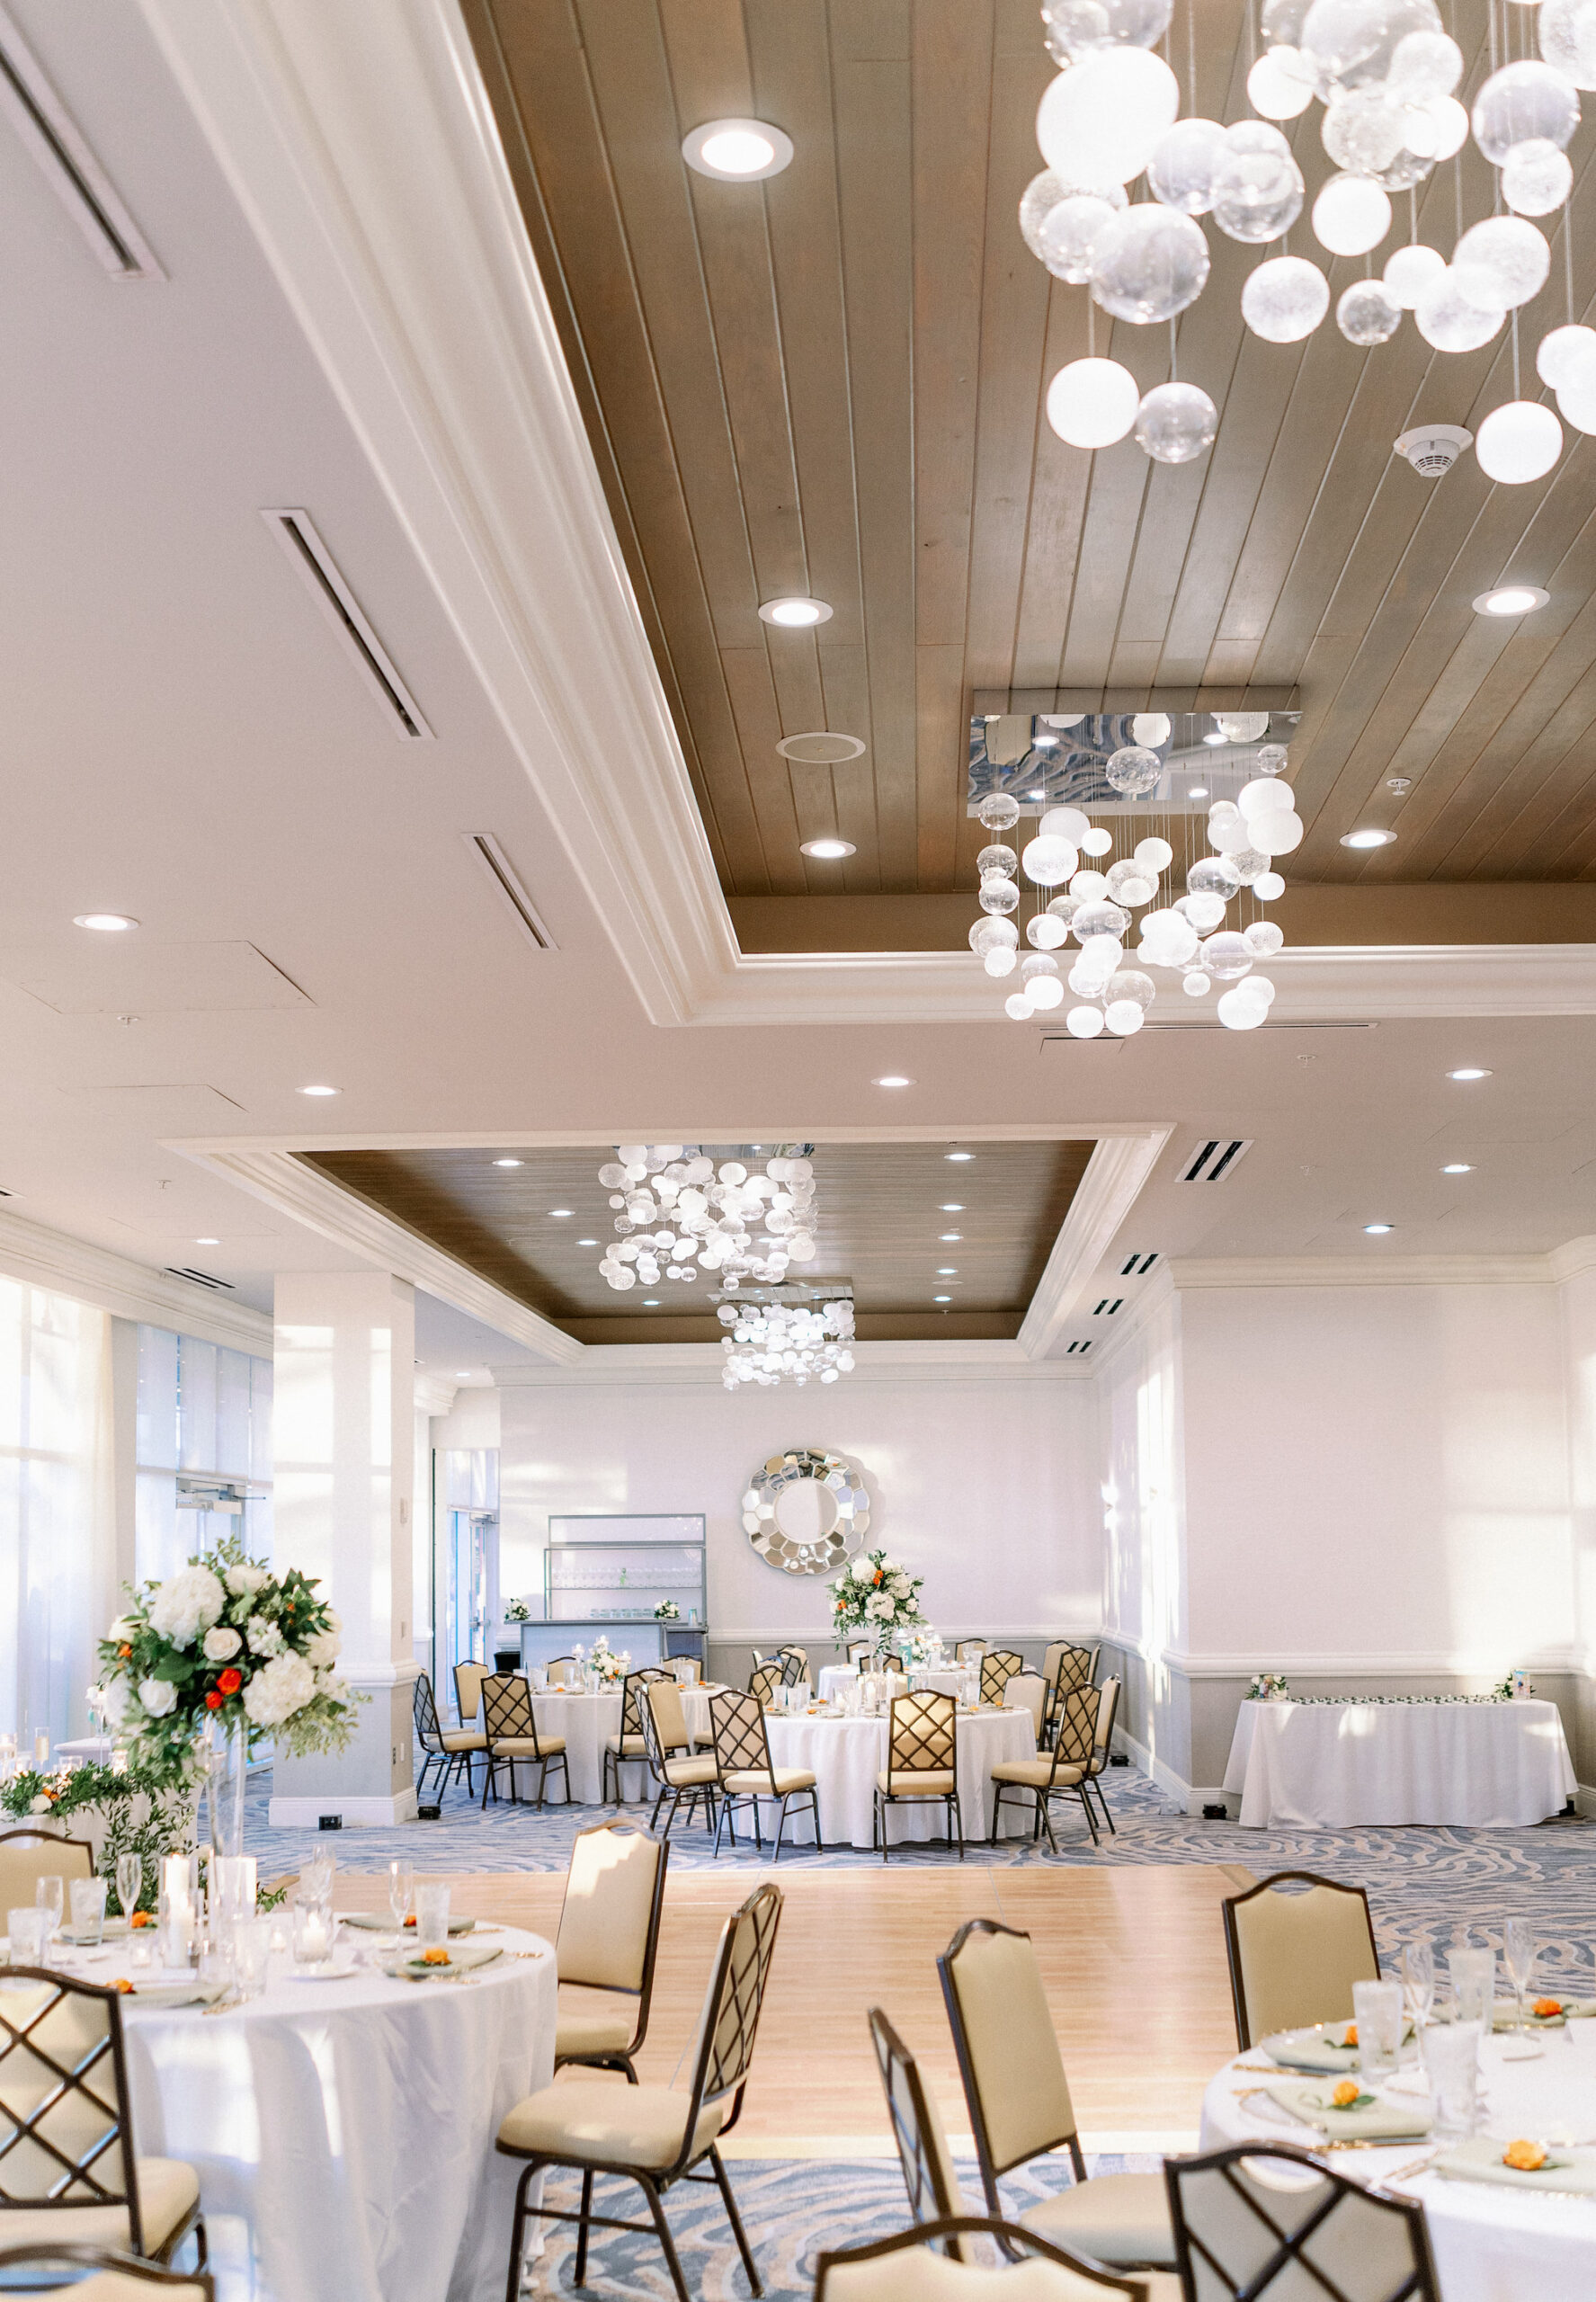 Hotel Ballroom Wedding Reception with White Walls and Tropical Detailing and Decor | Reception Venue Hyatt Regency Clearwater Beach | Clearwater Wedding Rentals Kate Ryan Event Rentals